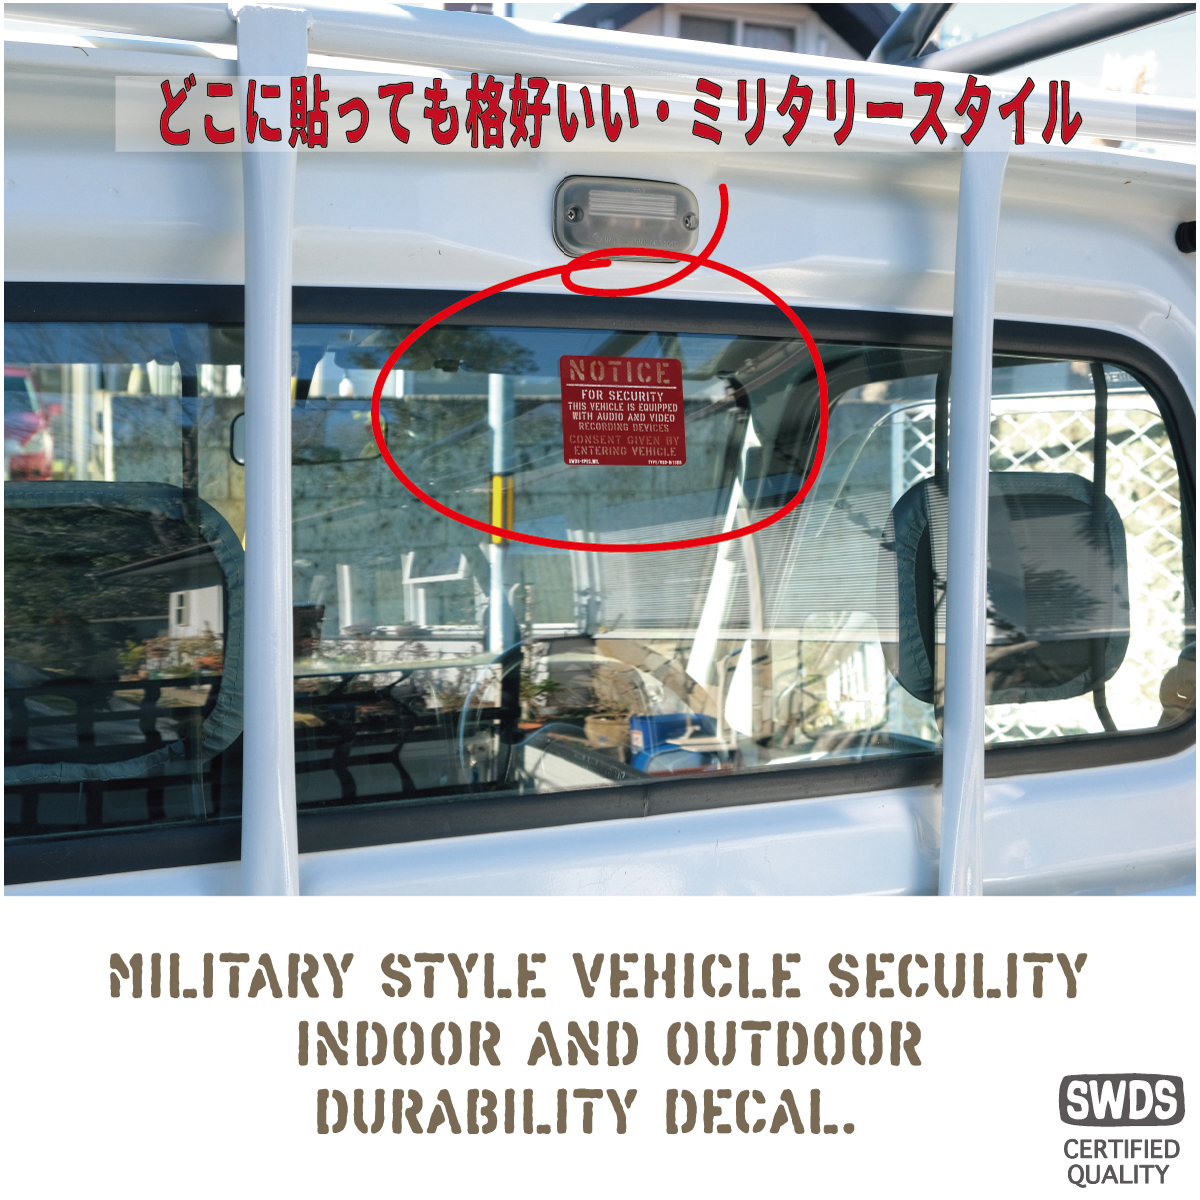 VEHICLE SECULITY DECALS